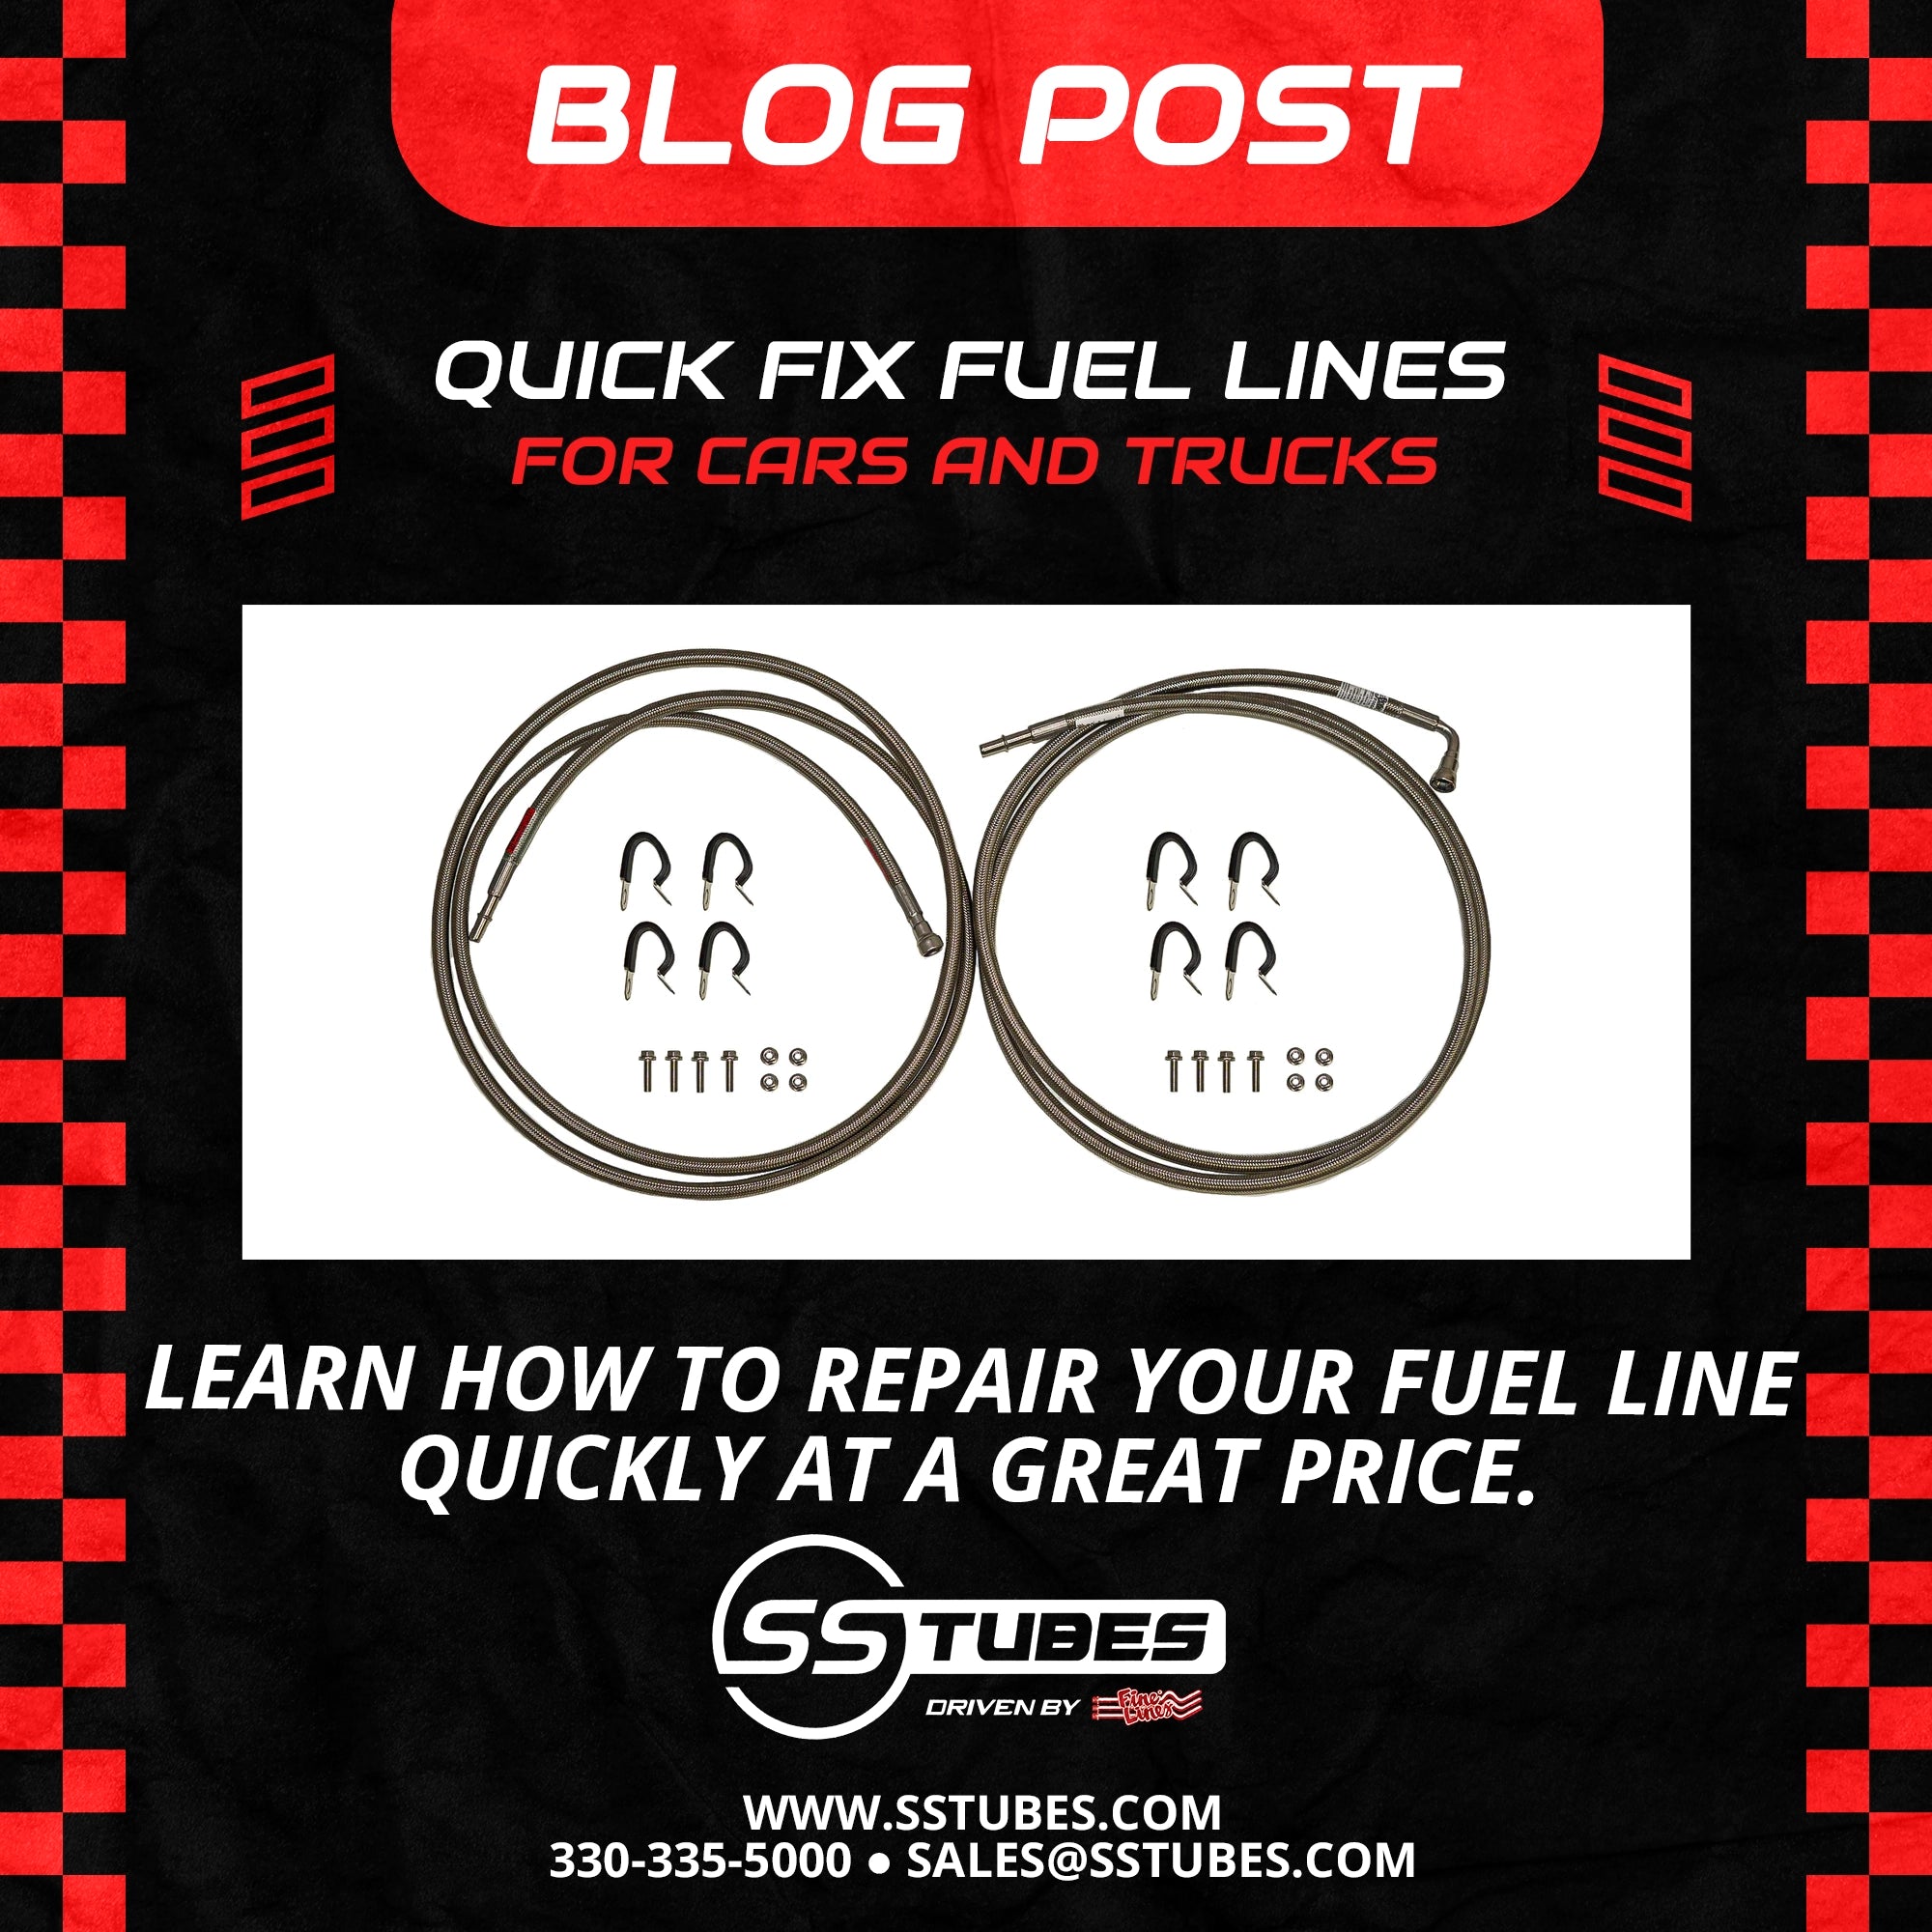 QuickFix Fuel Lines for Cars and Trucks